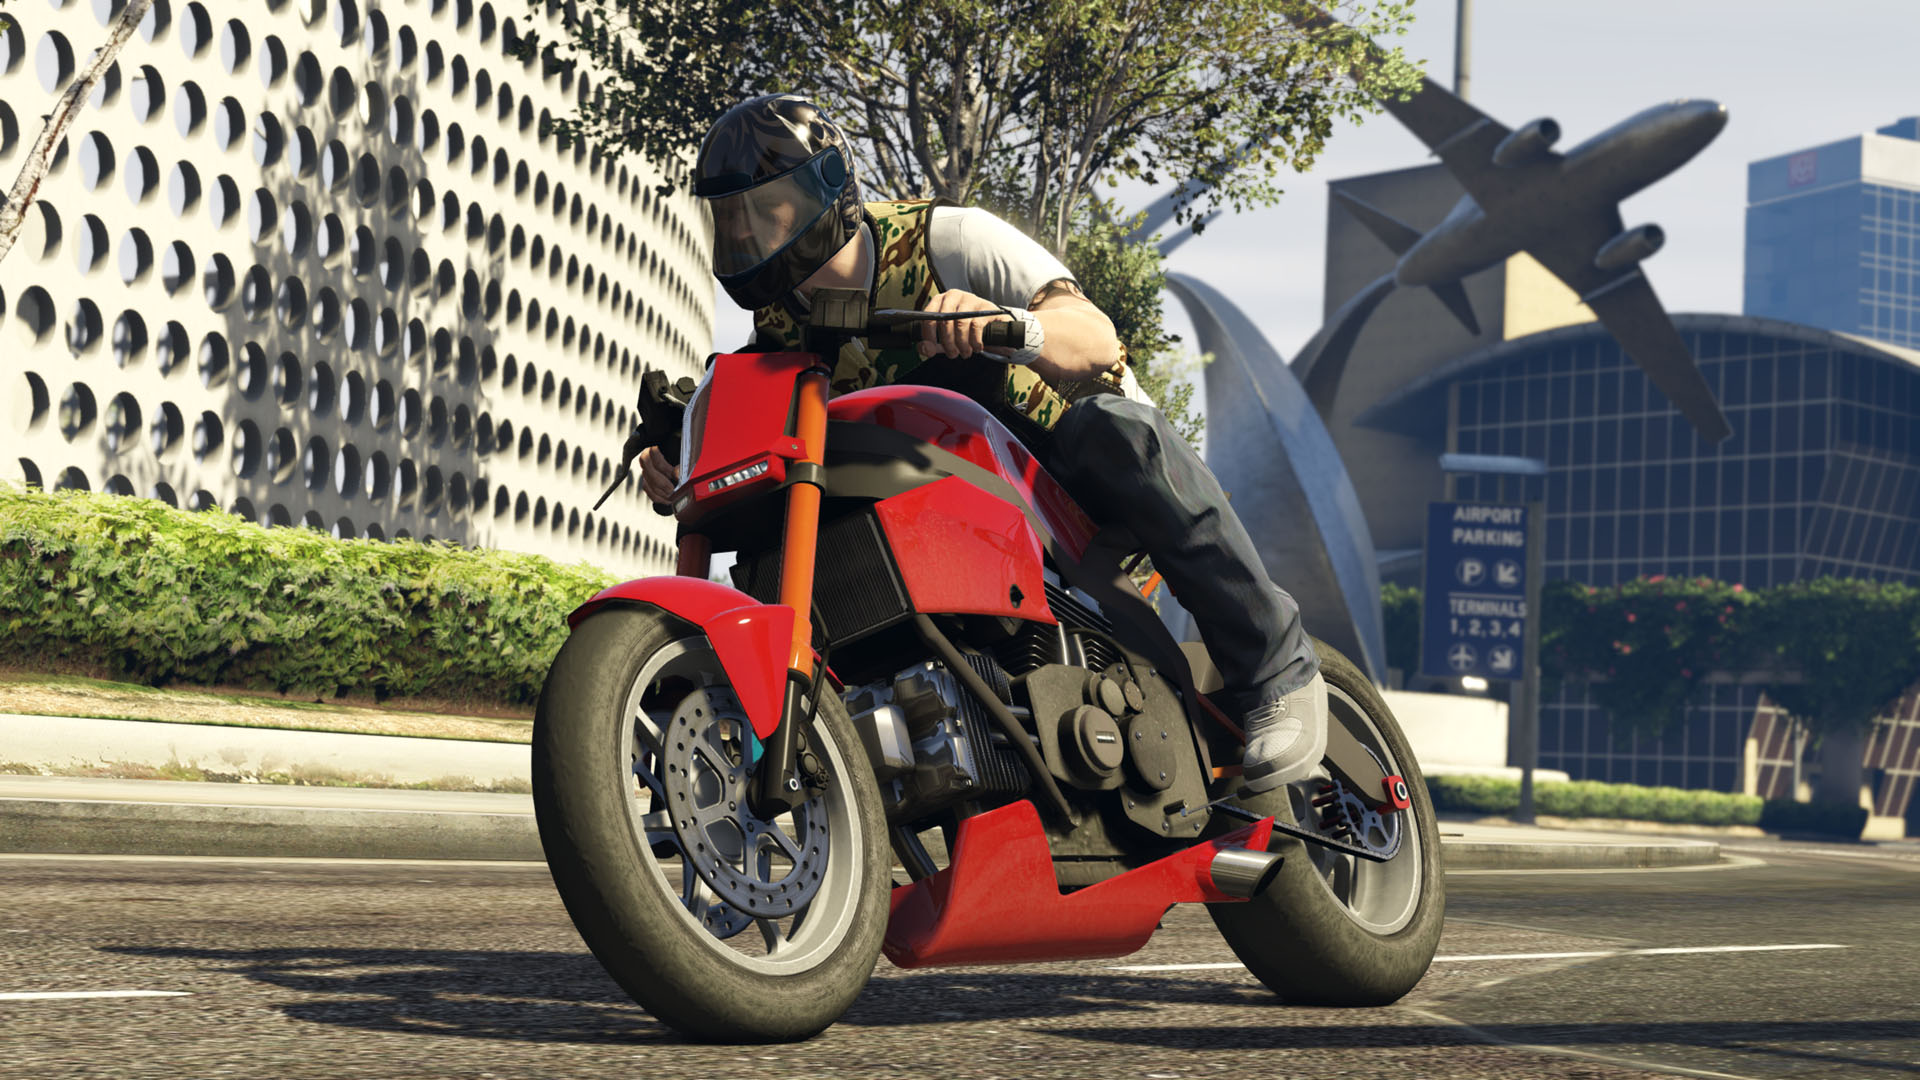 A man is driving Pegassi Vortex with helmet worn